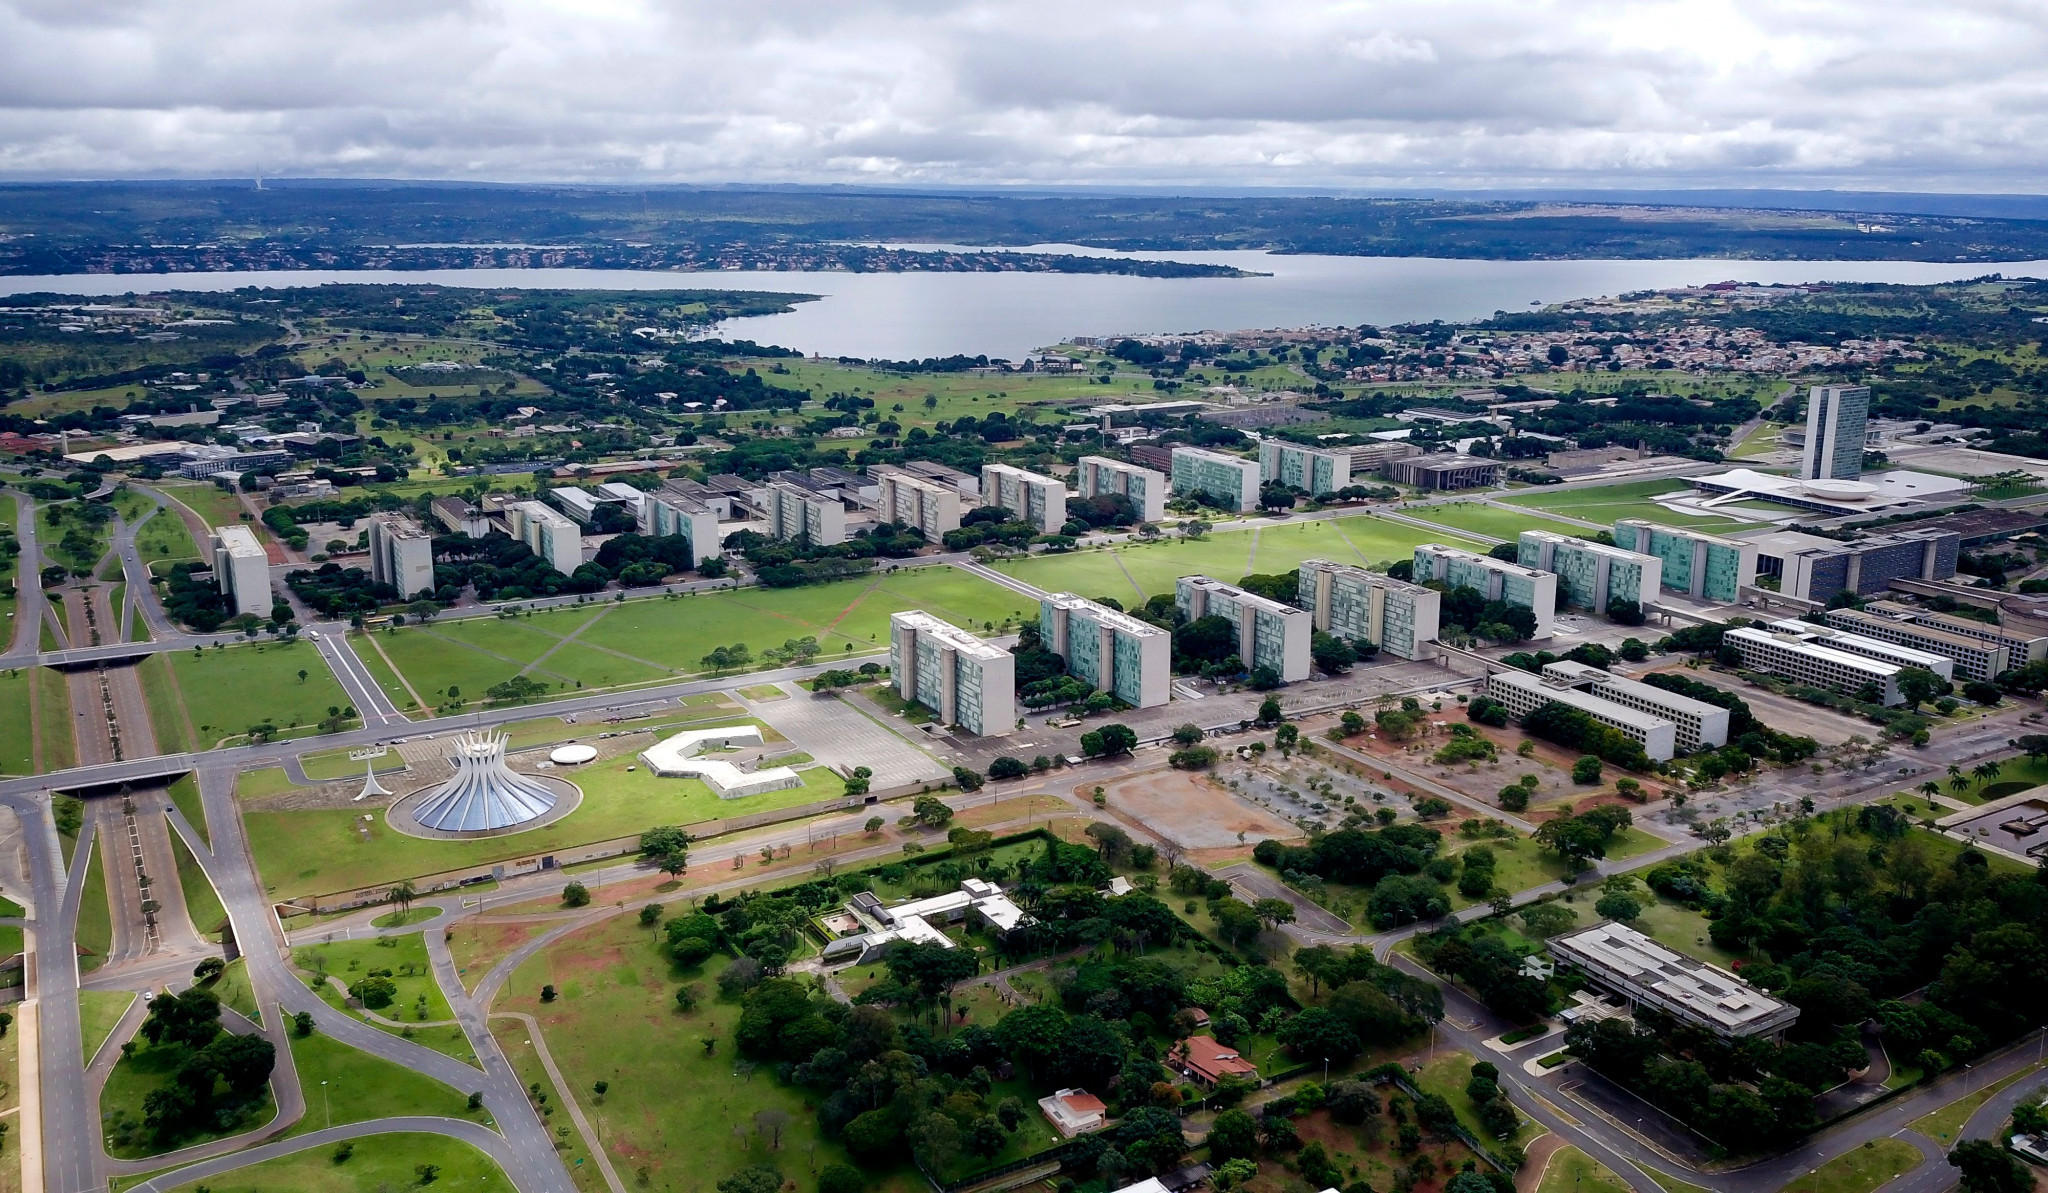 Brasilia and Recife selected to host FIBA AmeriCup games